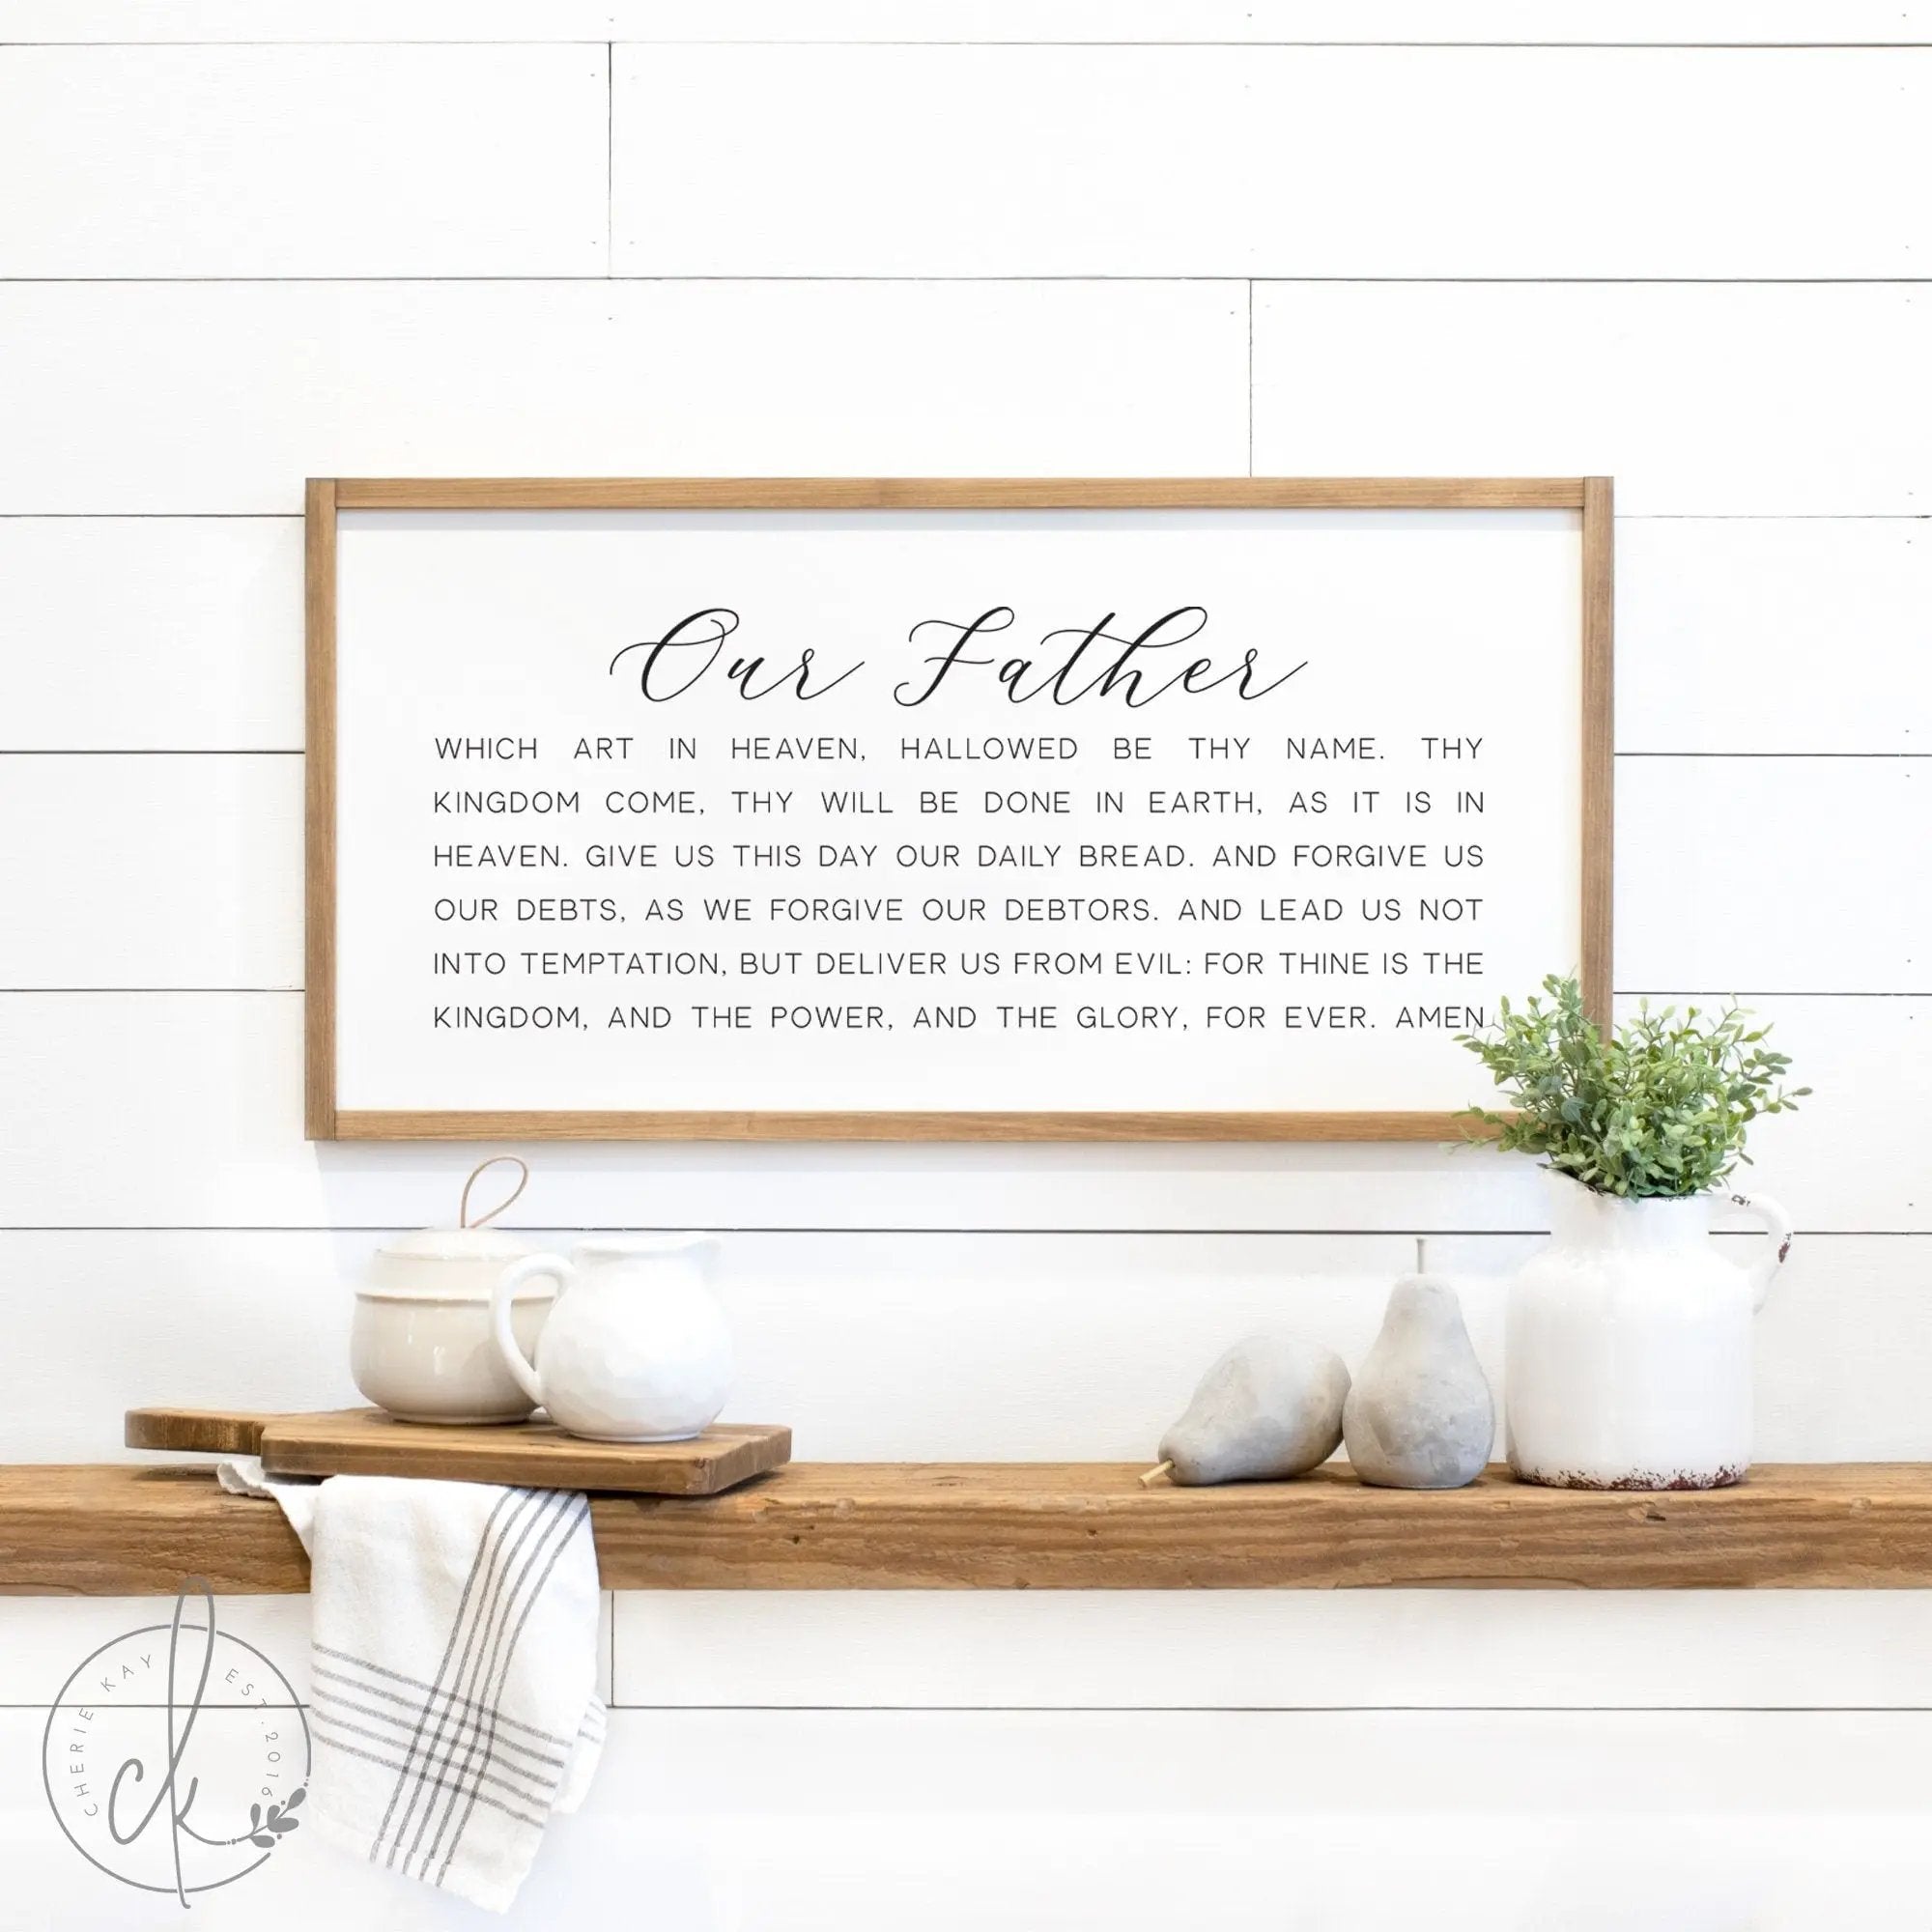 Dining room wall decor | Our father which art in heaven sign | scripture sign for dining room | Lord's prayer sign | kitchen wood sign